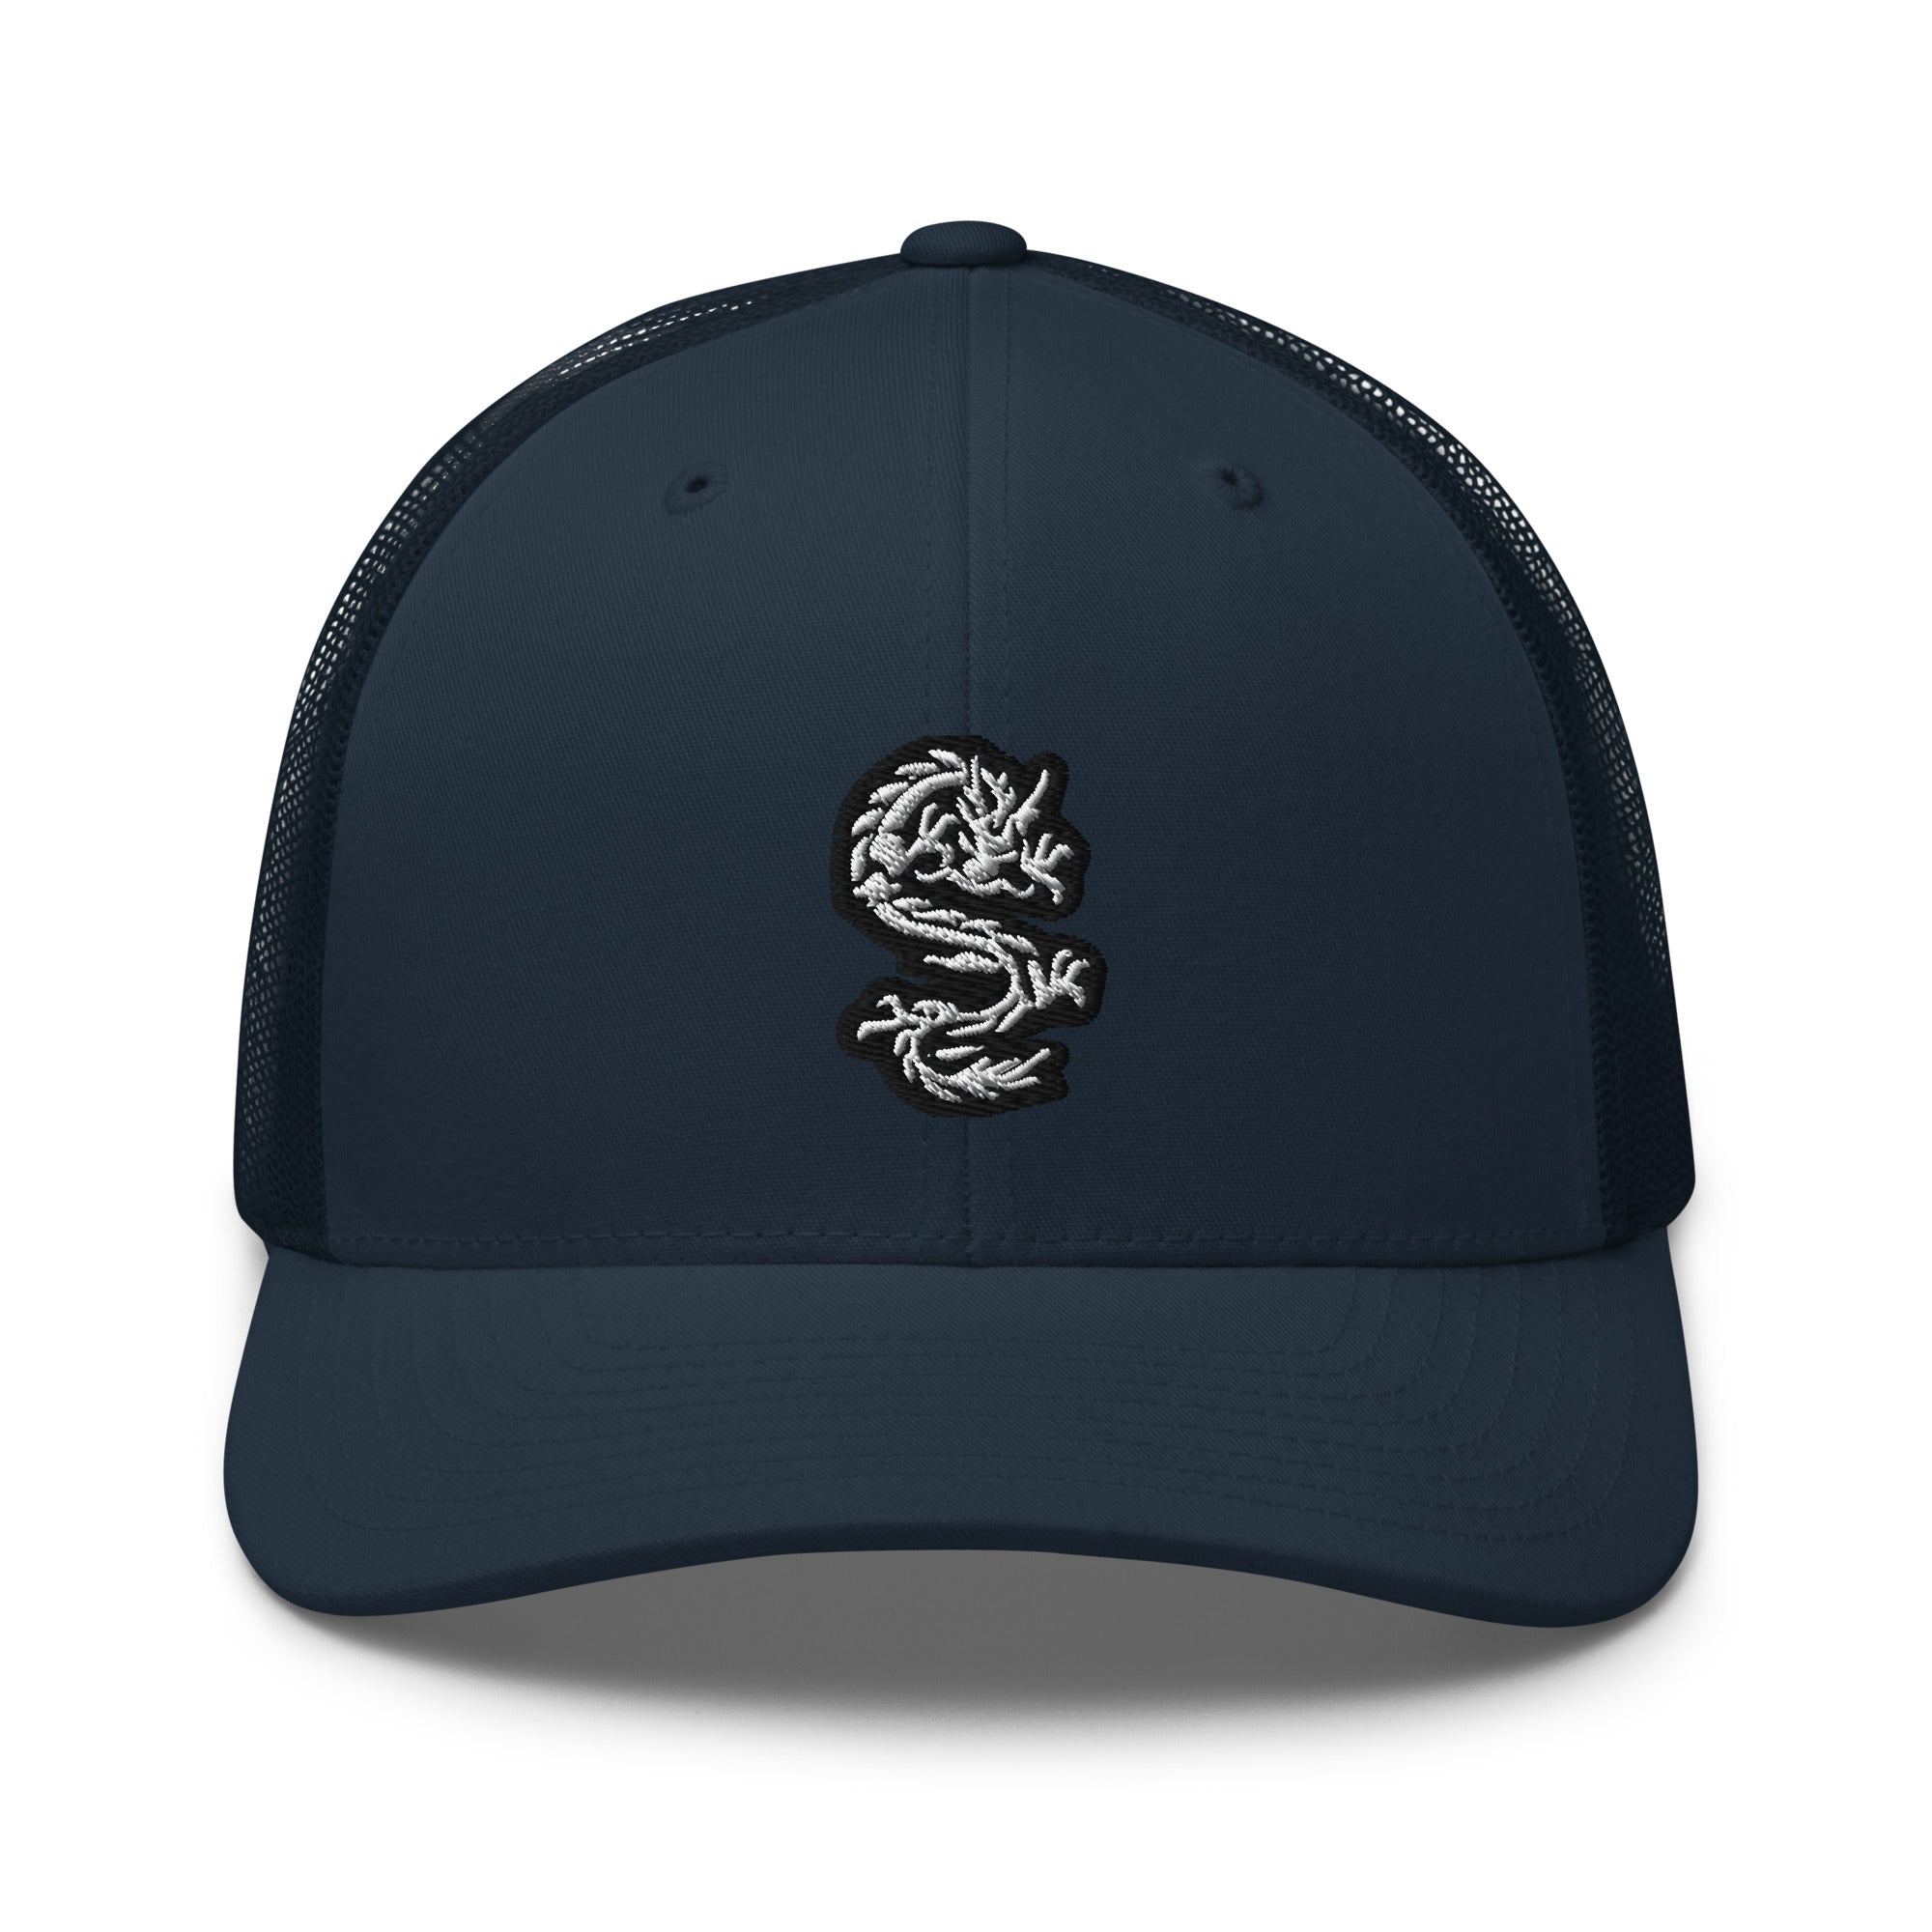 White Ancient Chinese Dragon Embroidered Retro Trucker Cap Snapback Hat